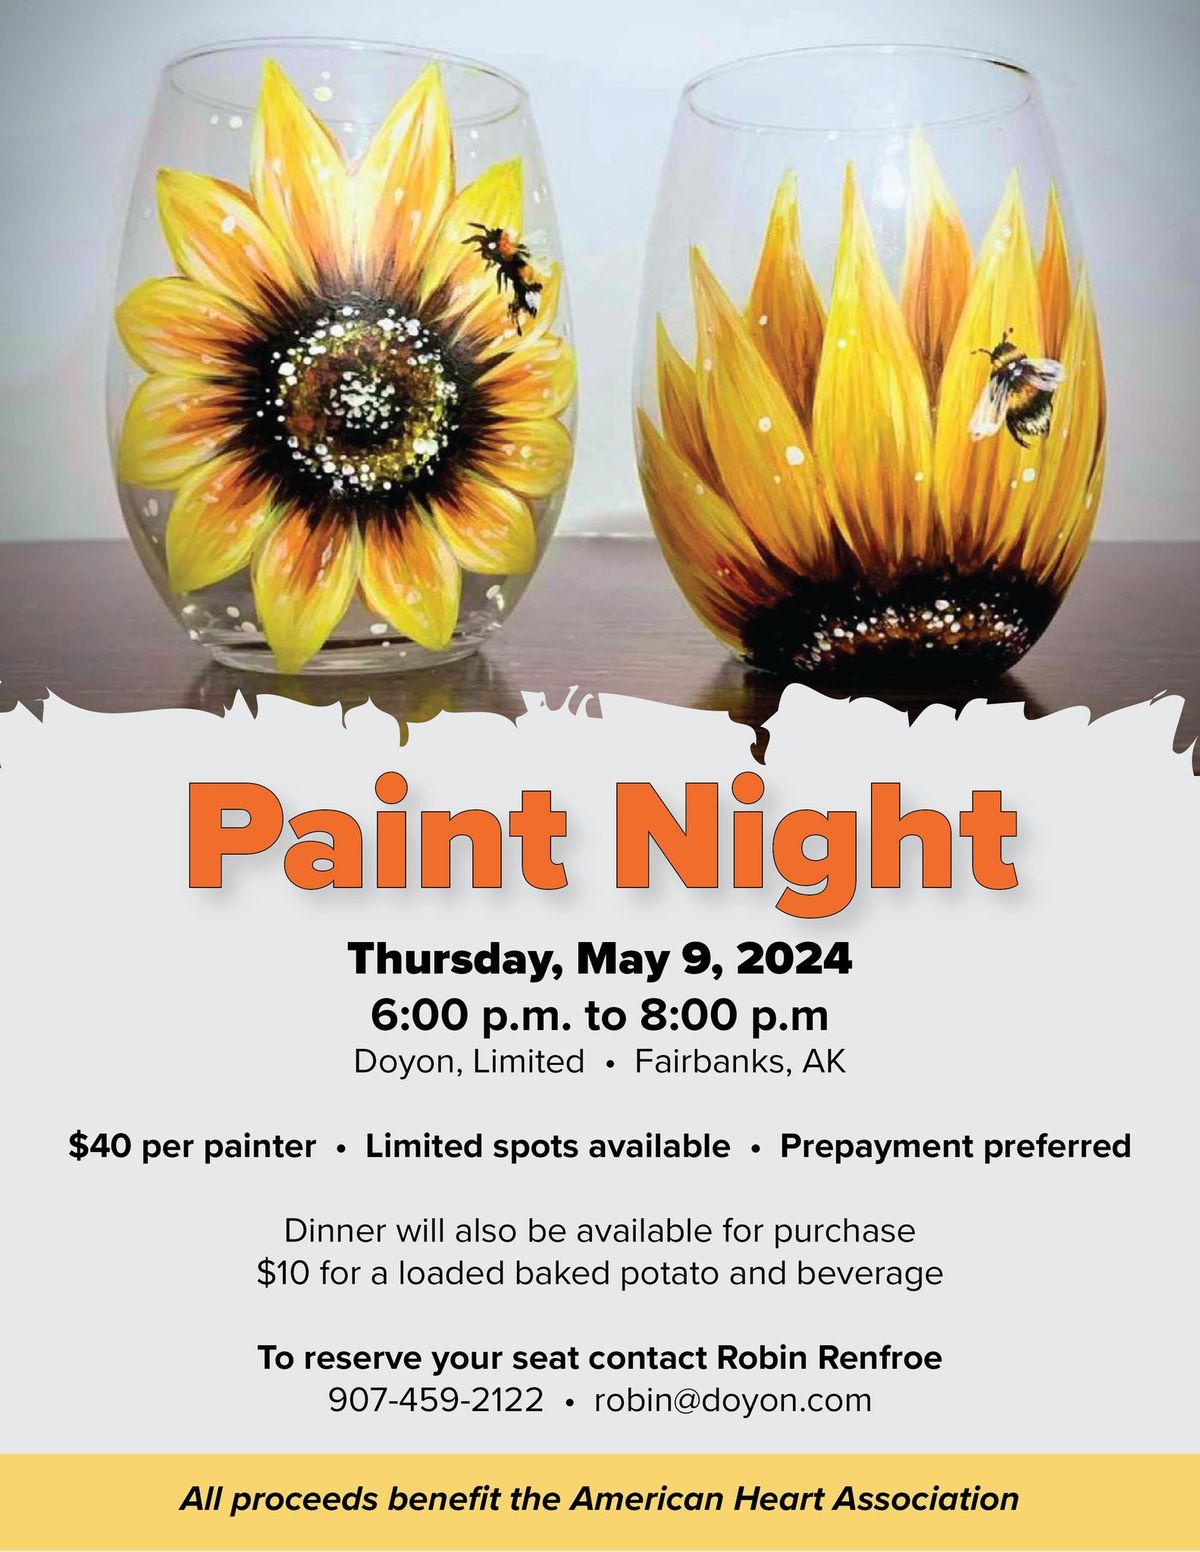 Paint Night at Doyon, Limited